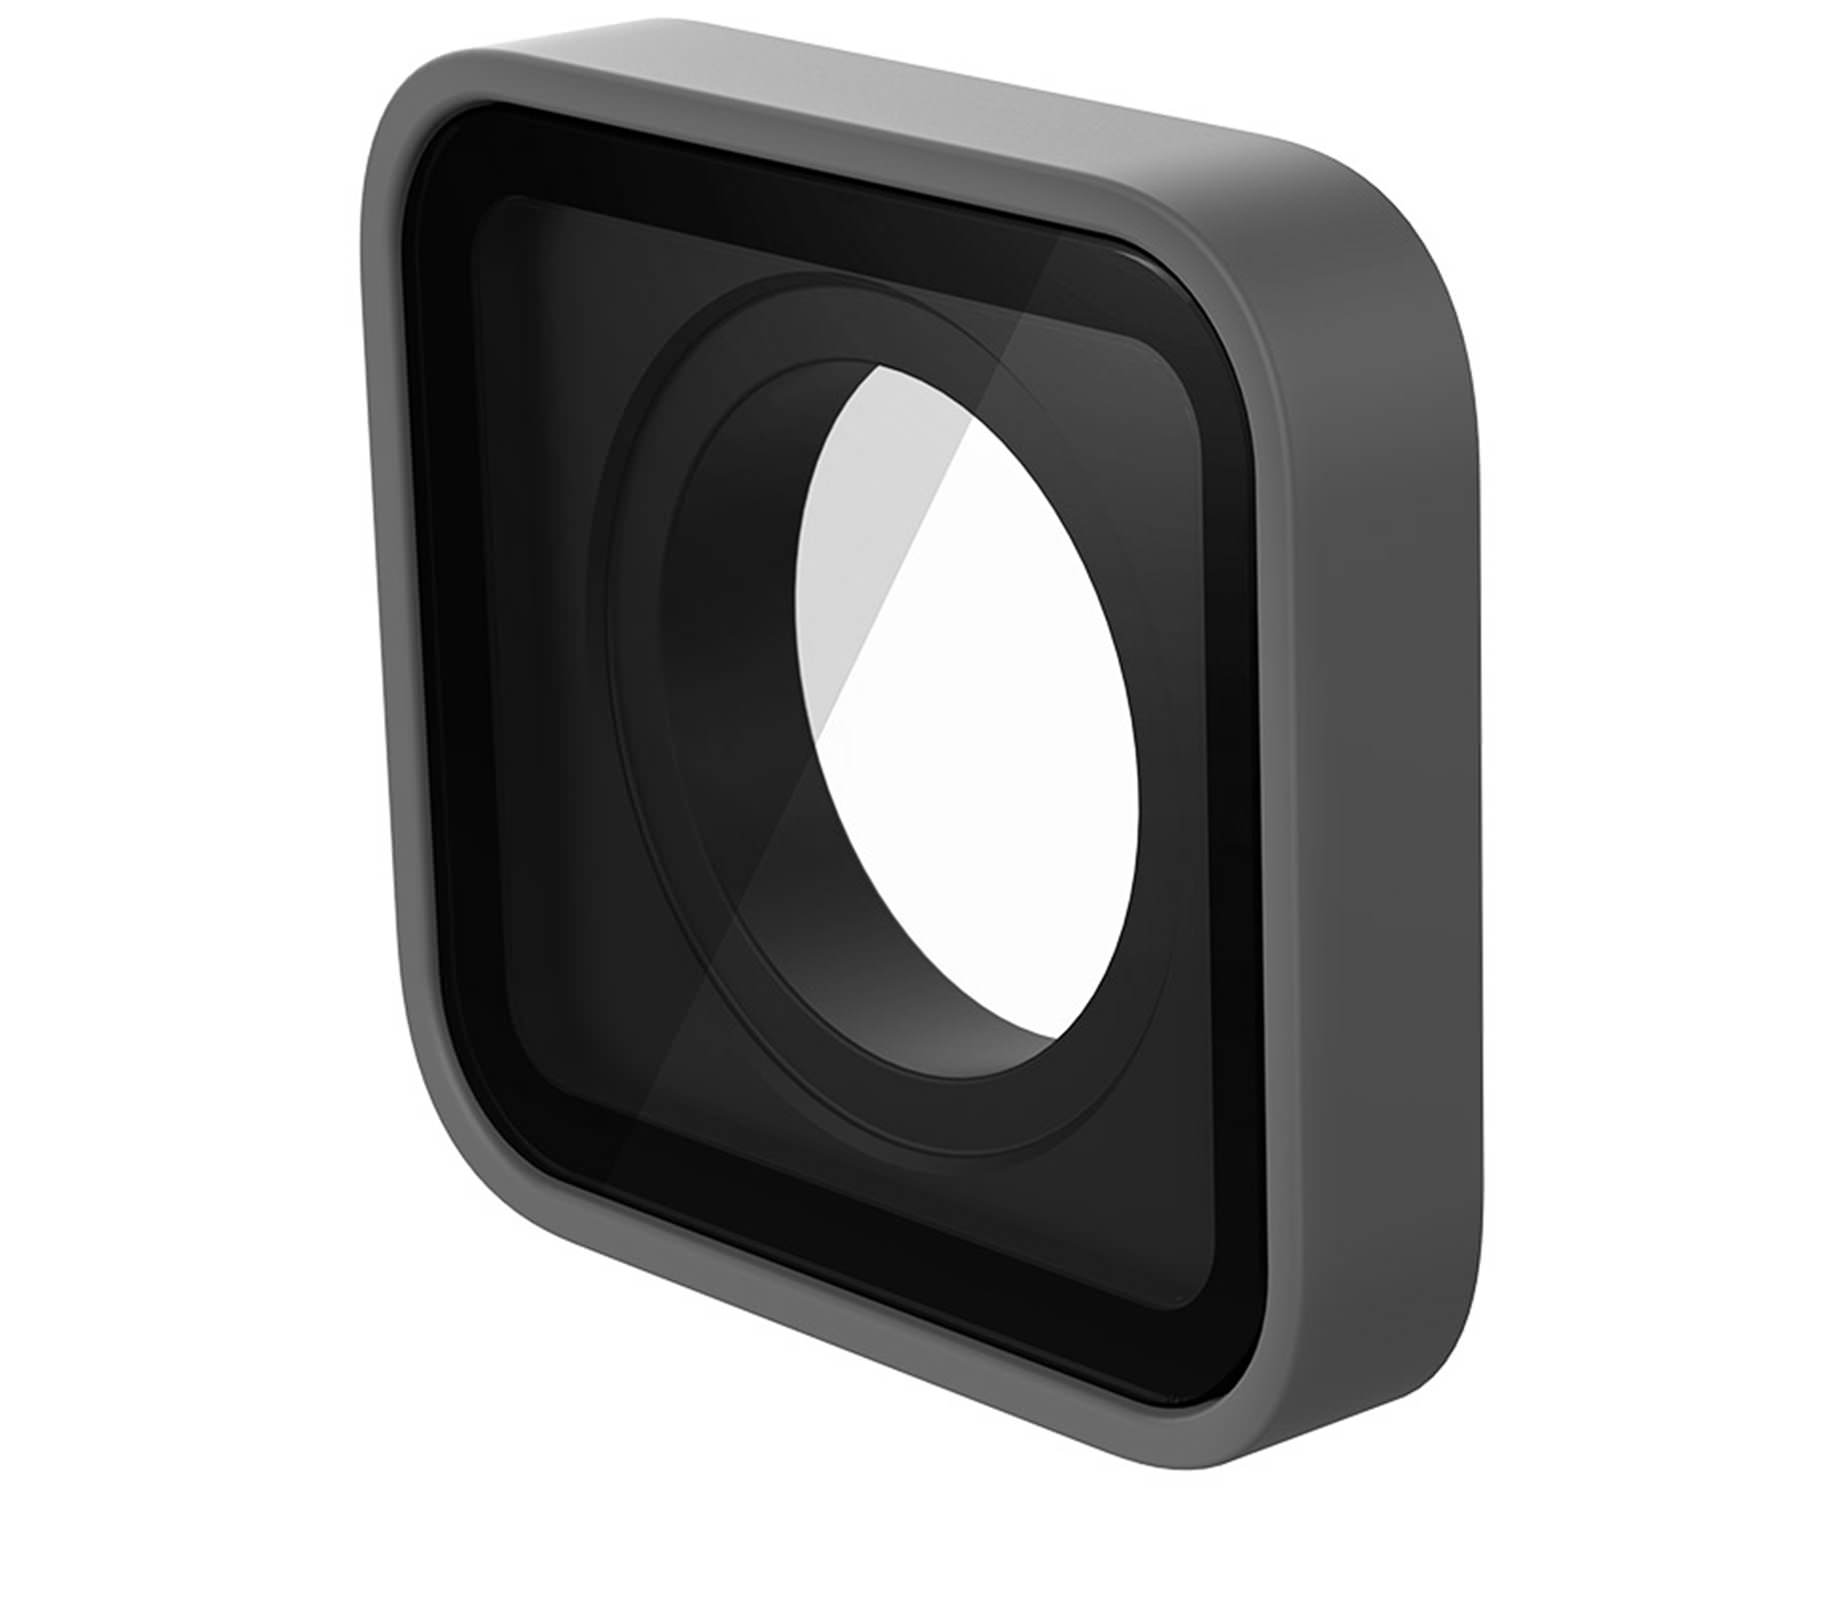 ong-kinh-bao-ve-thay-the-may-quay-gopro-hero5-black-protective-lens-replacement-76336-wetrek_vn